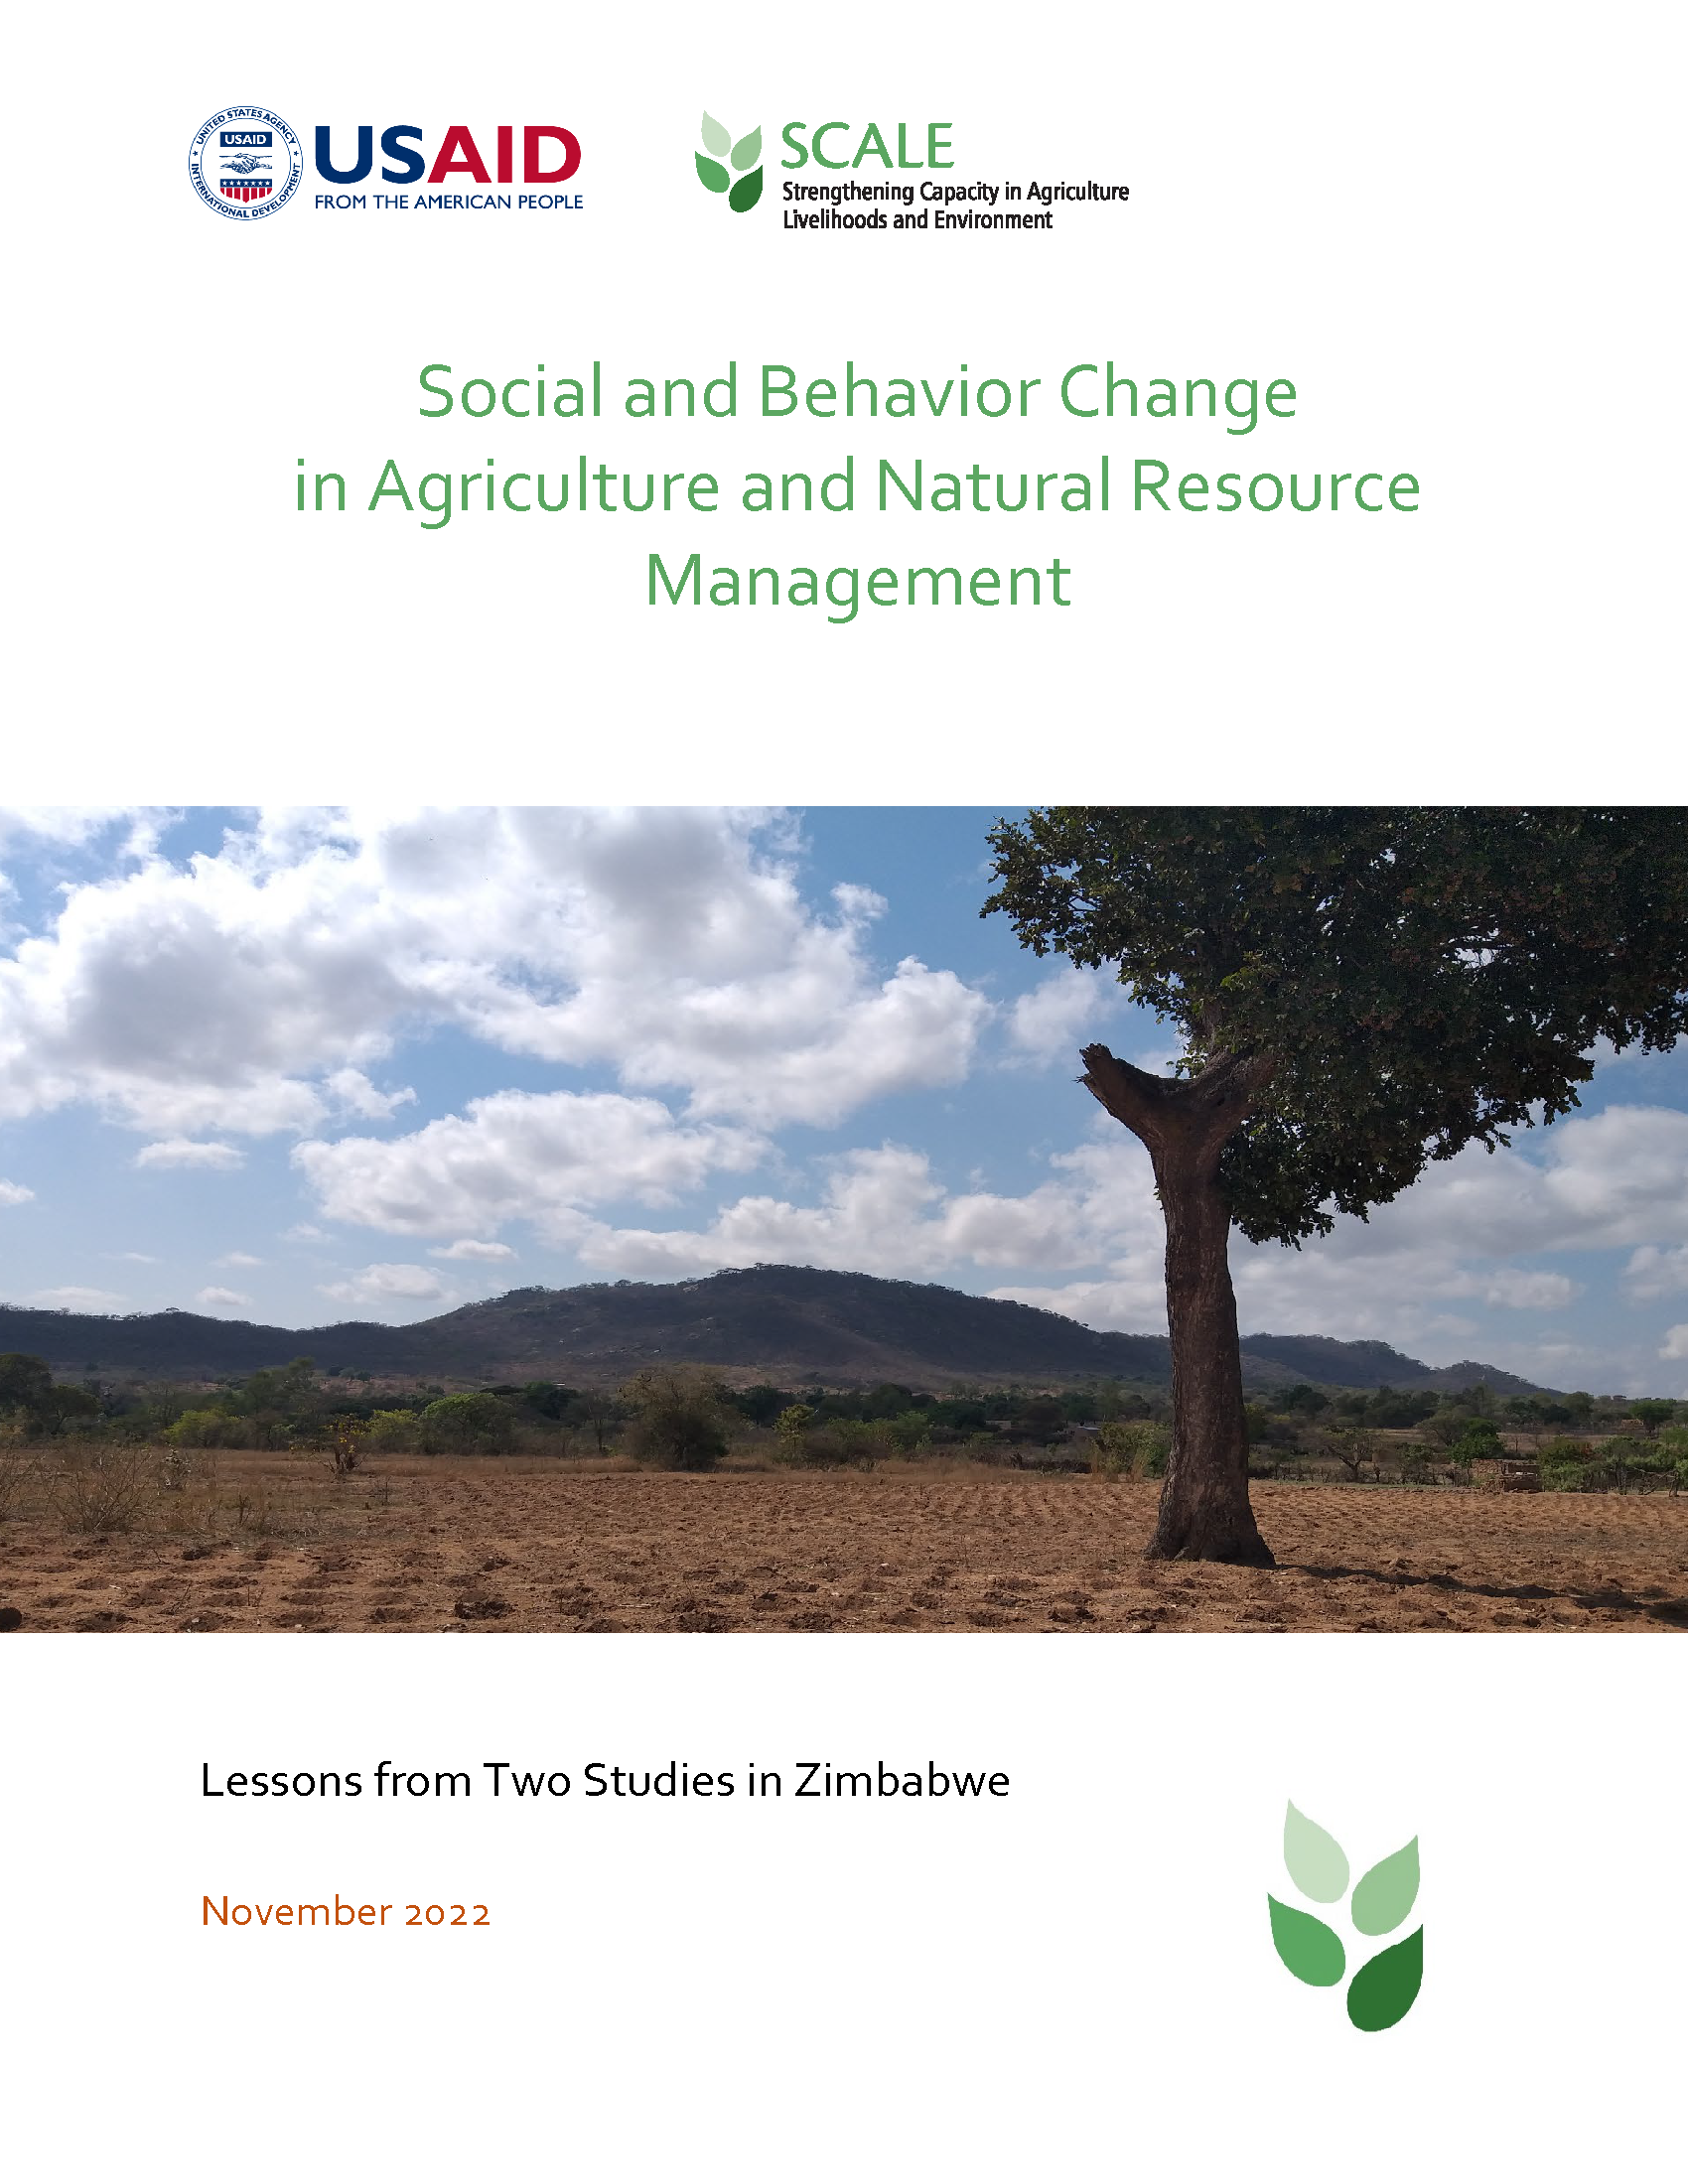 Cover page for Social and Behavior Change in Agriculture and Natural Resource Management